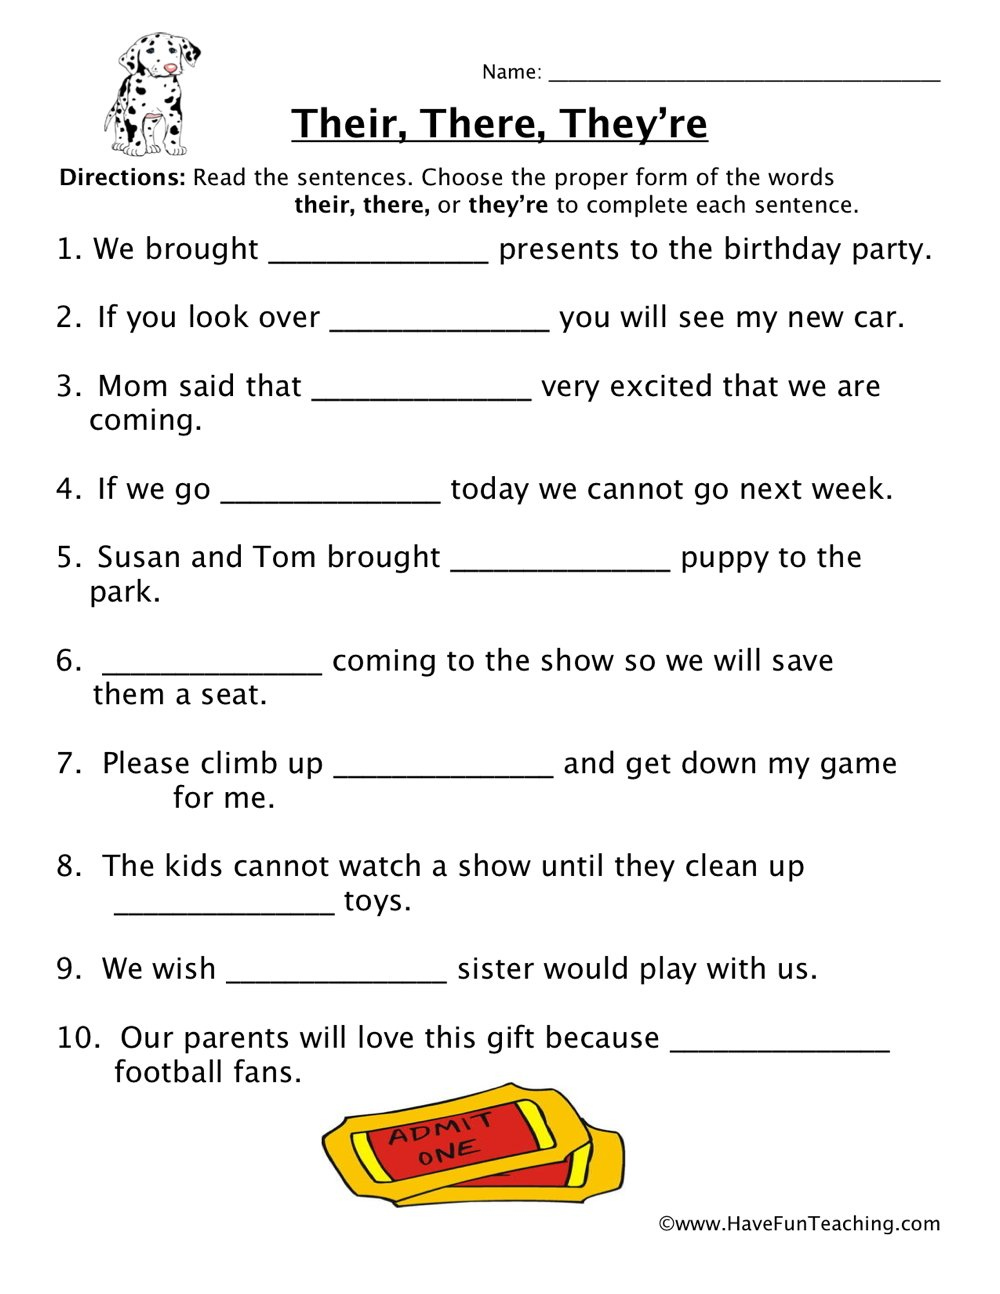 Their There They re Homophones Worksheet Have Fun Teaching